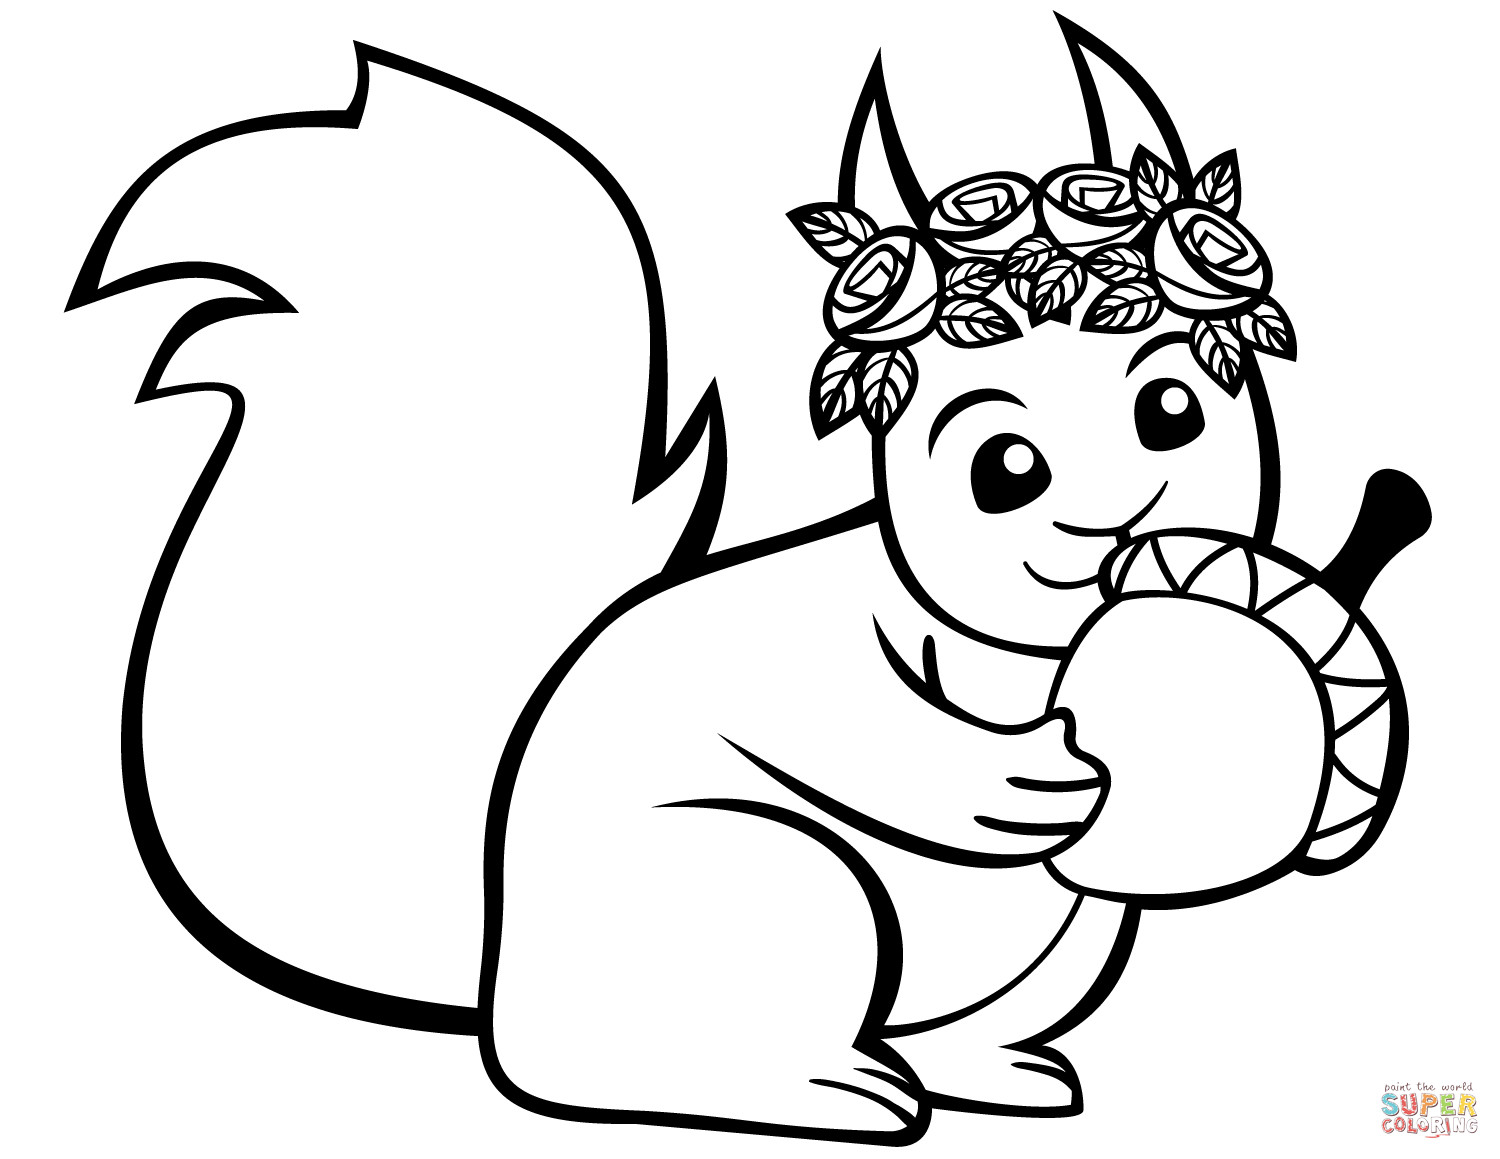 Baby Squirrel Coloring Pages
 Cute Squirrel with an Acorn coloring page